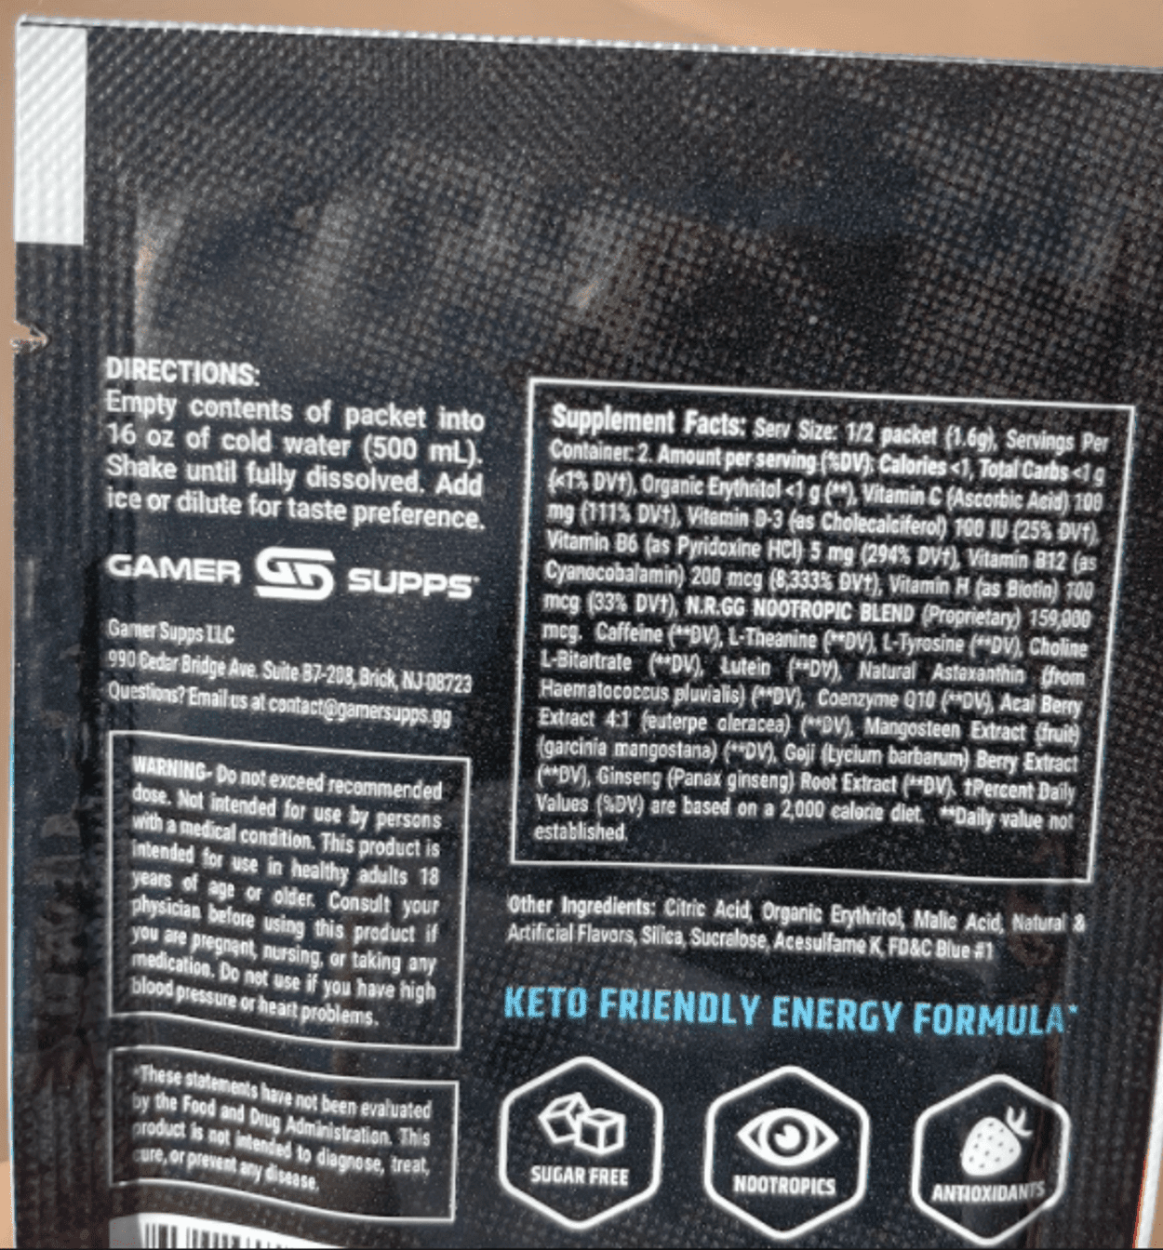 Nutrition facts of GamerSupps GG.